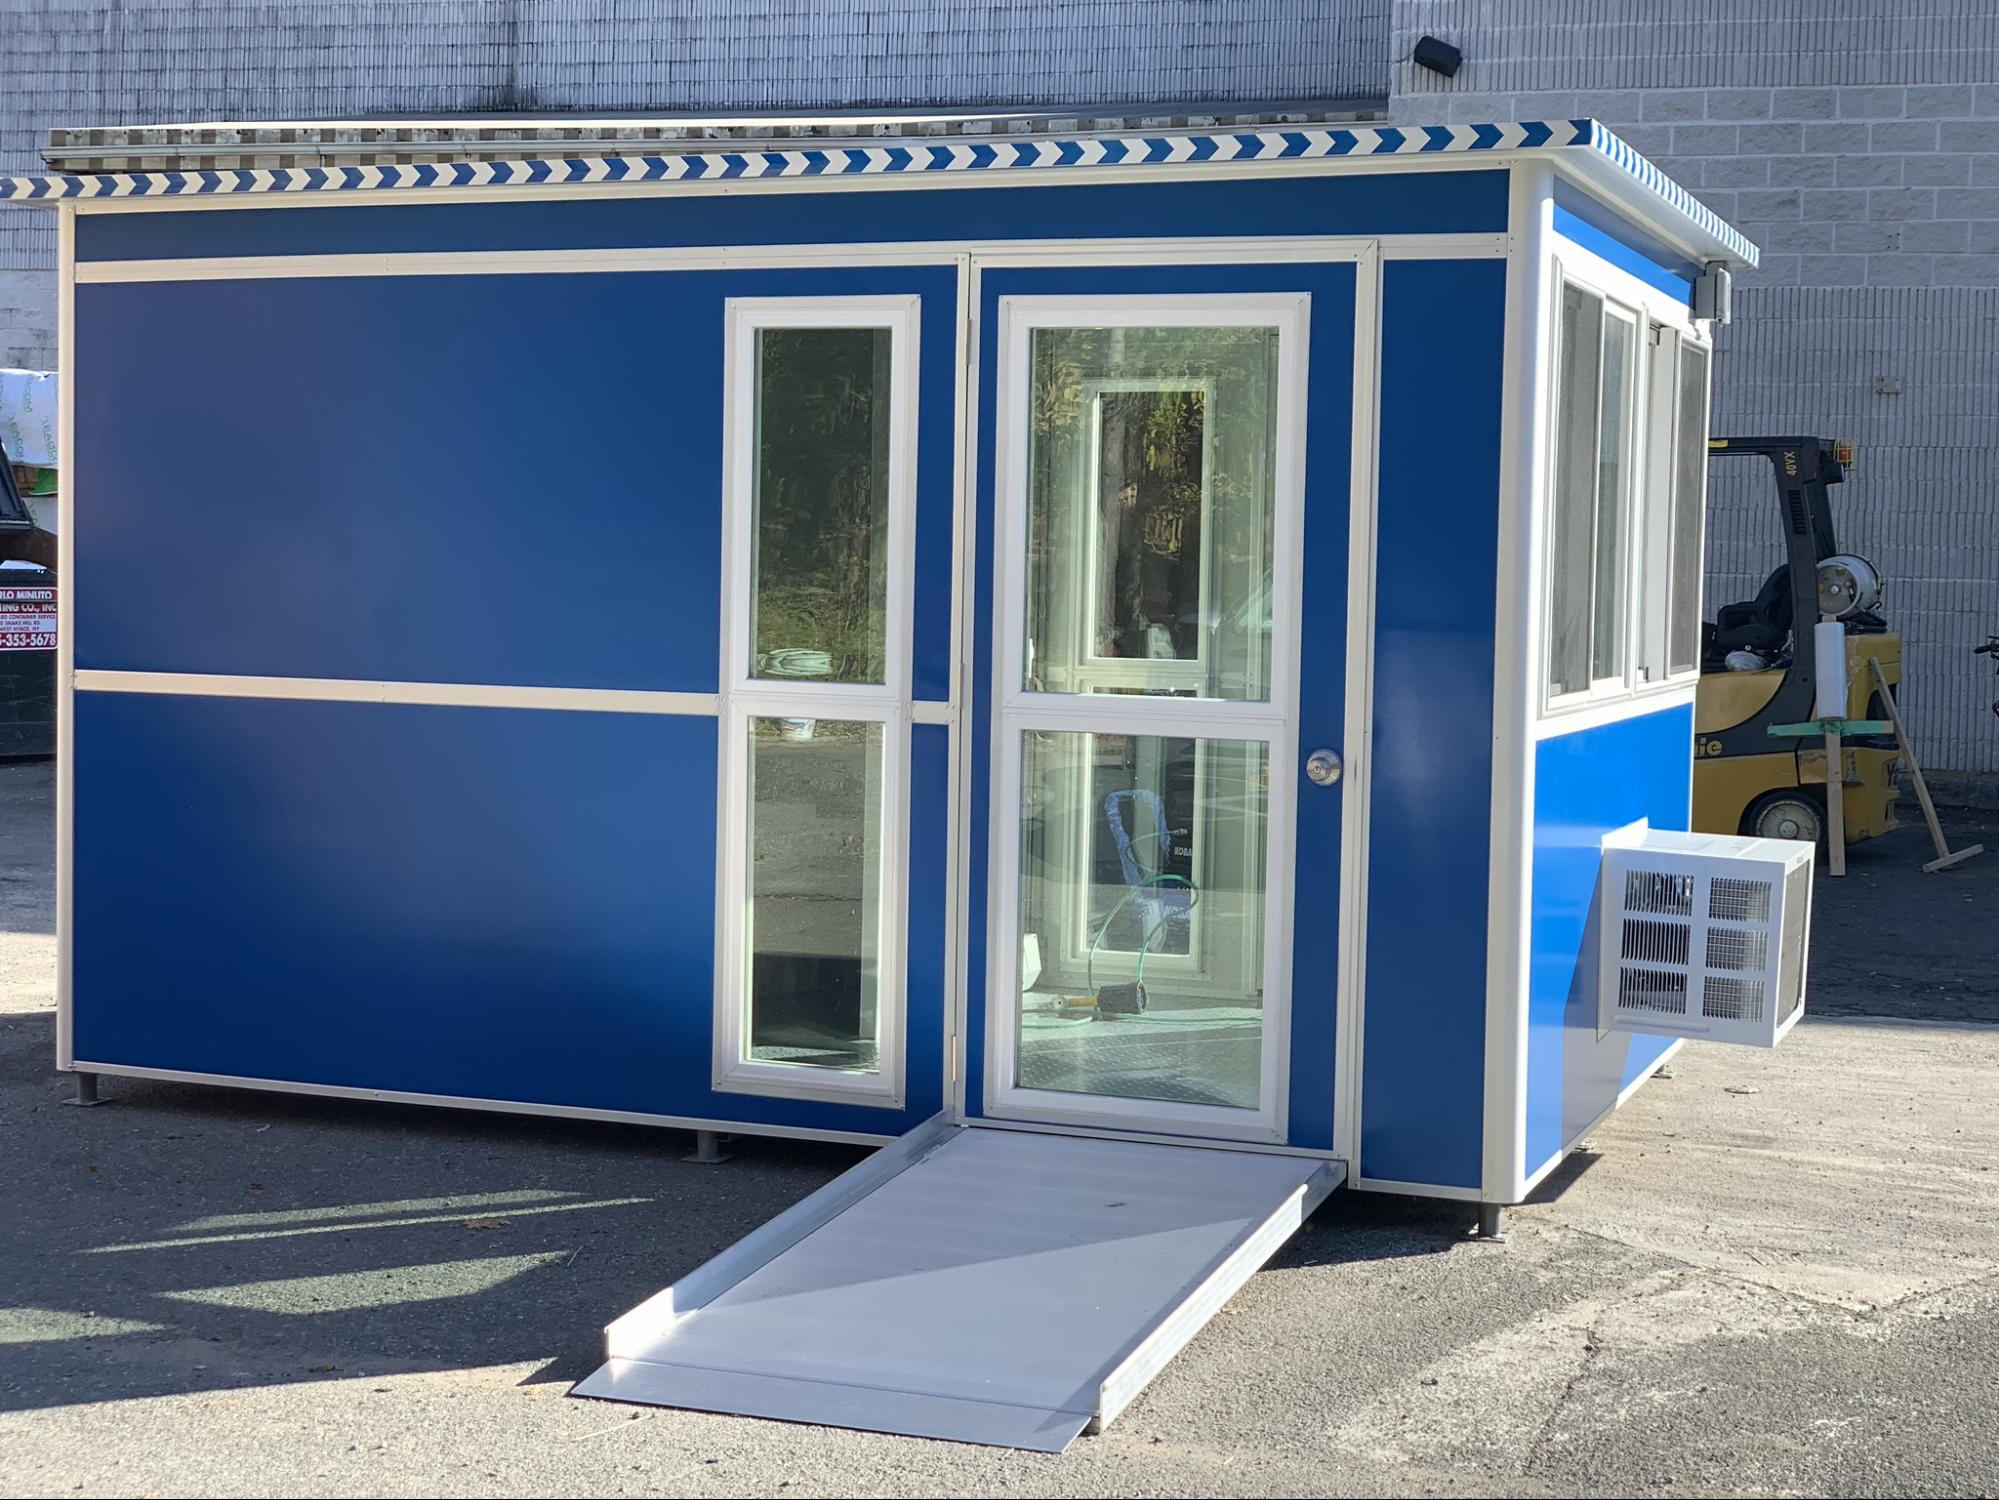 outdoor booth with glass door, a/c unit, and entrance ramp for safety and warmth in winter